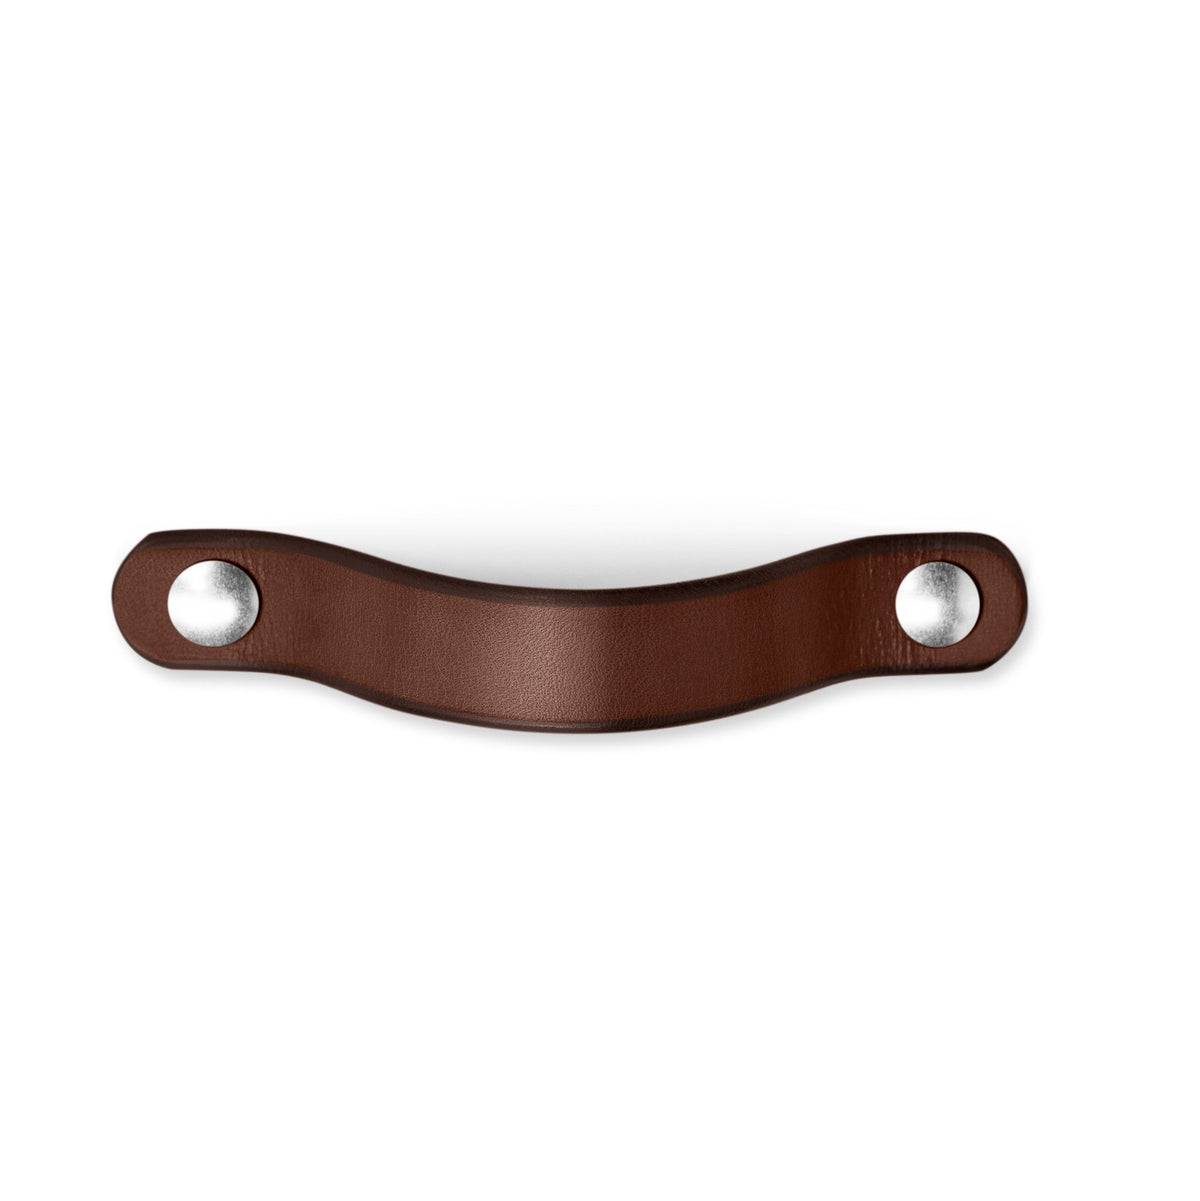 Walnut Studiolo Drawer Pulls Leather Drawer Pull - The Flanders - Dark Brown Leather with Nickel Hardware